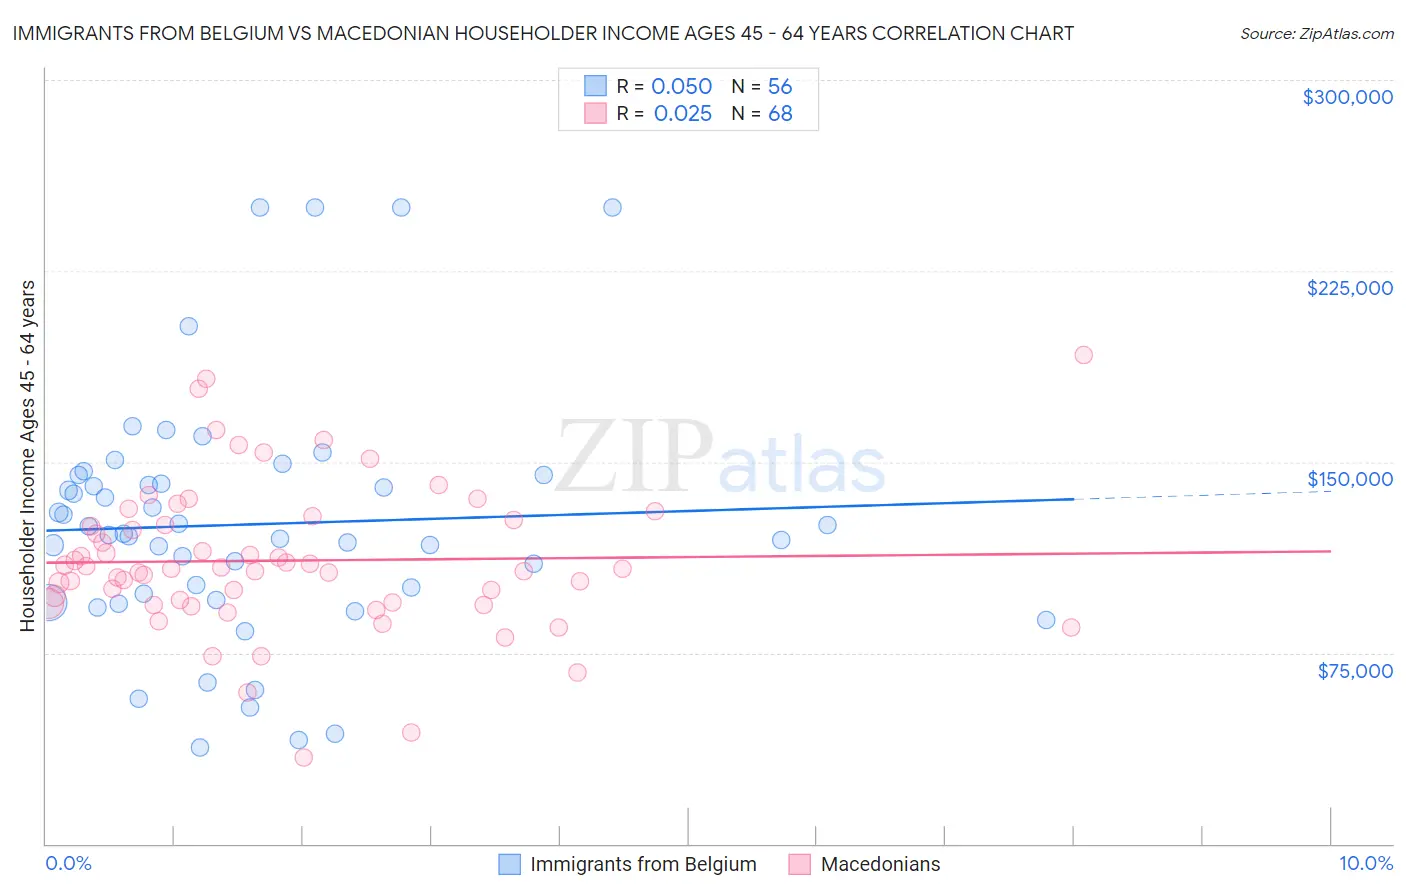 Immigrants from Belgium vs Macedonian Householder Income Ages 45 - 64 years